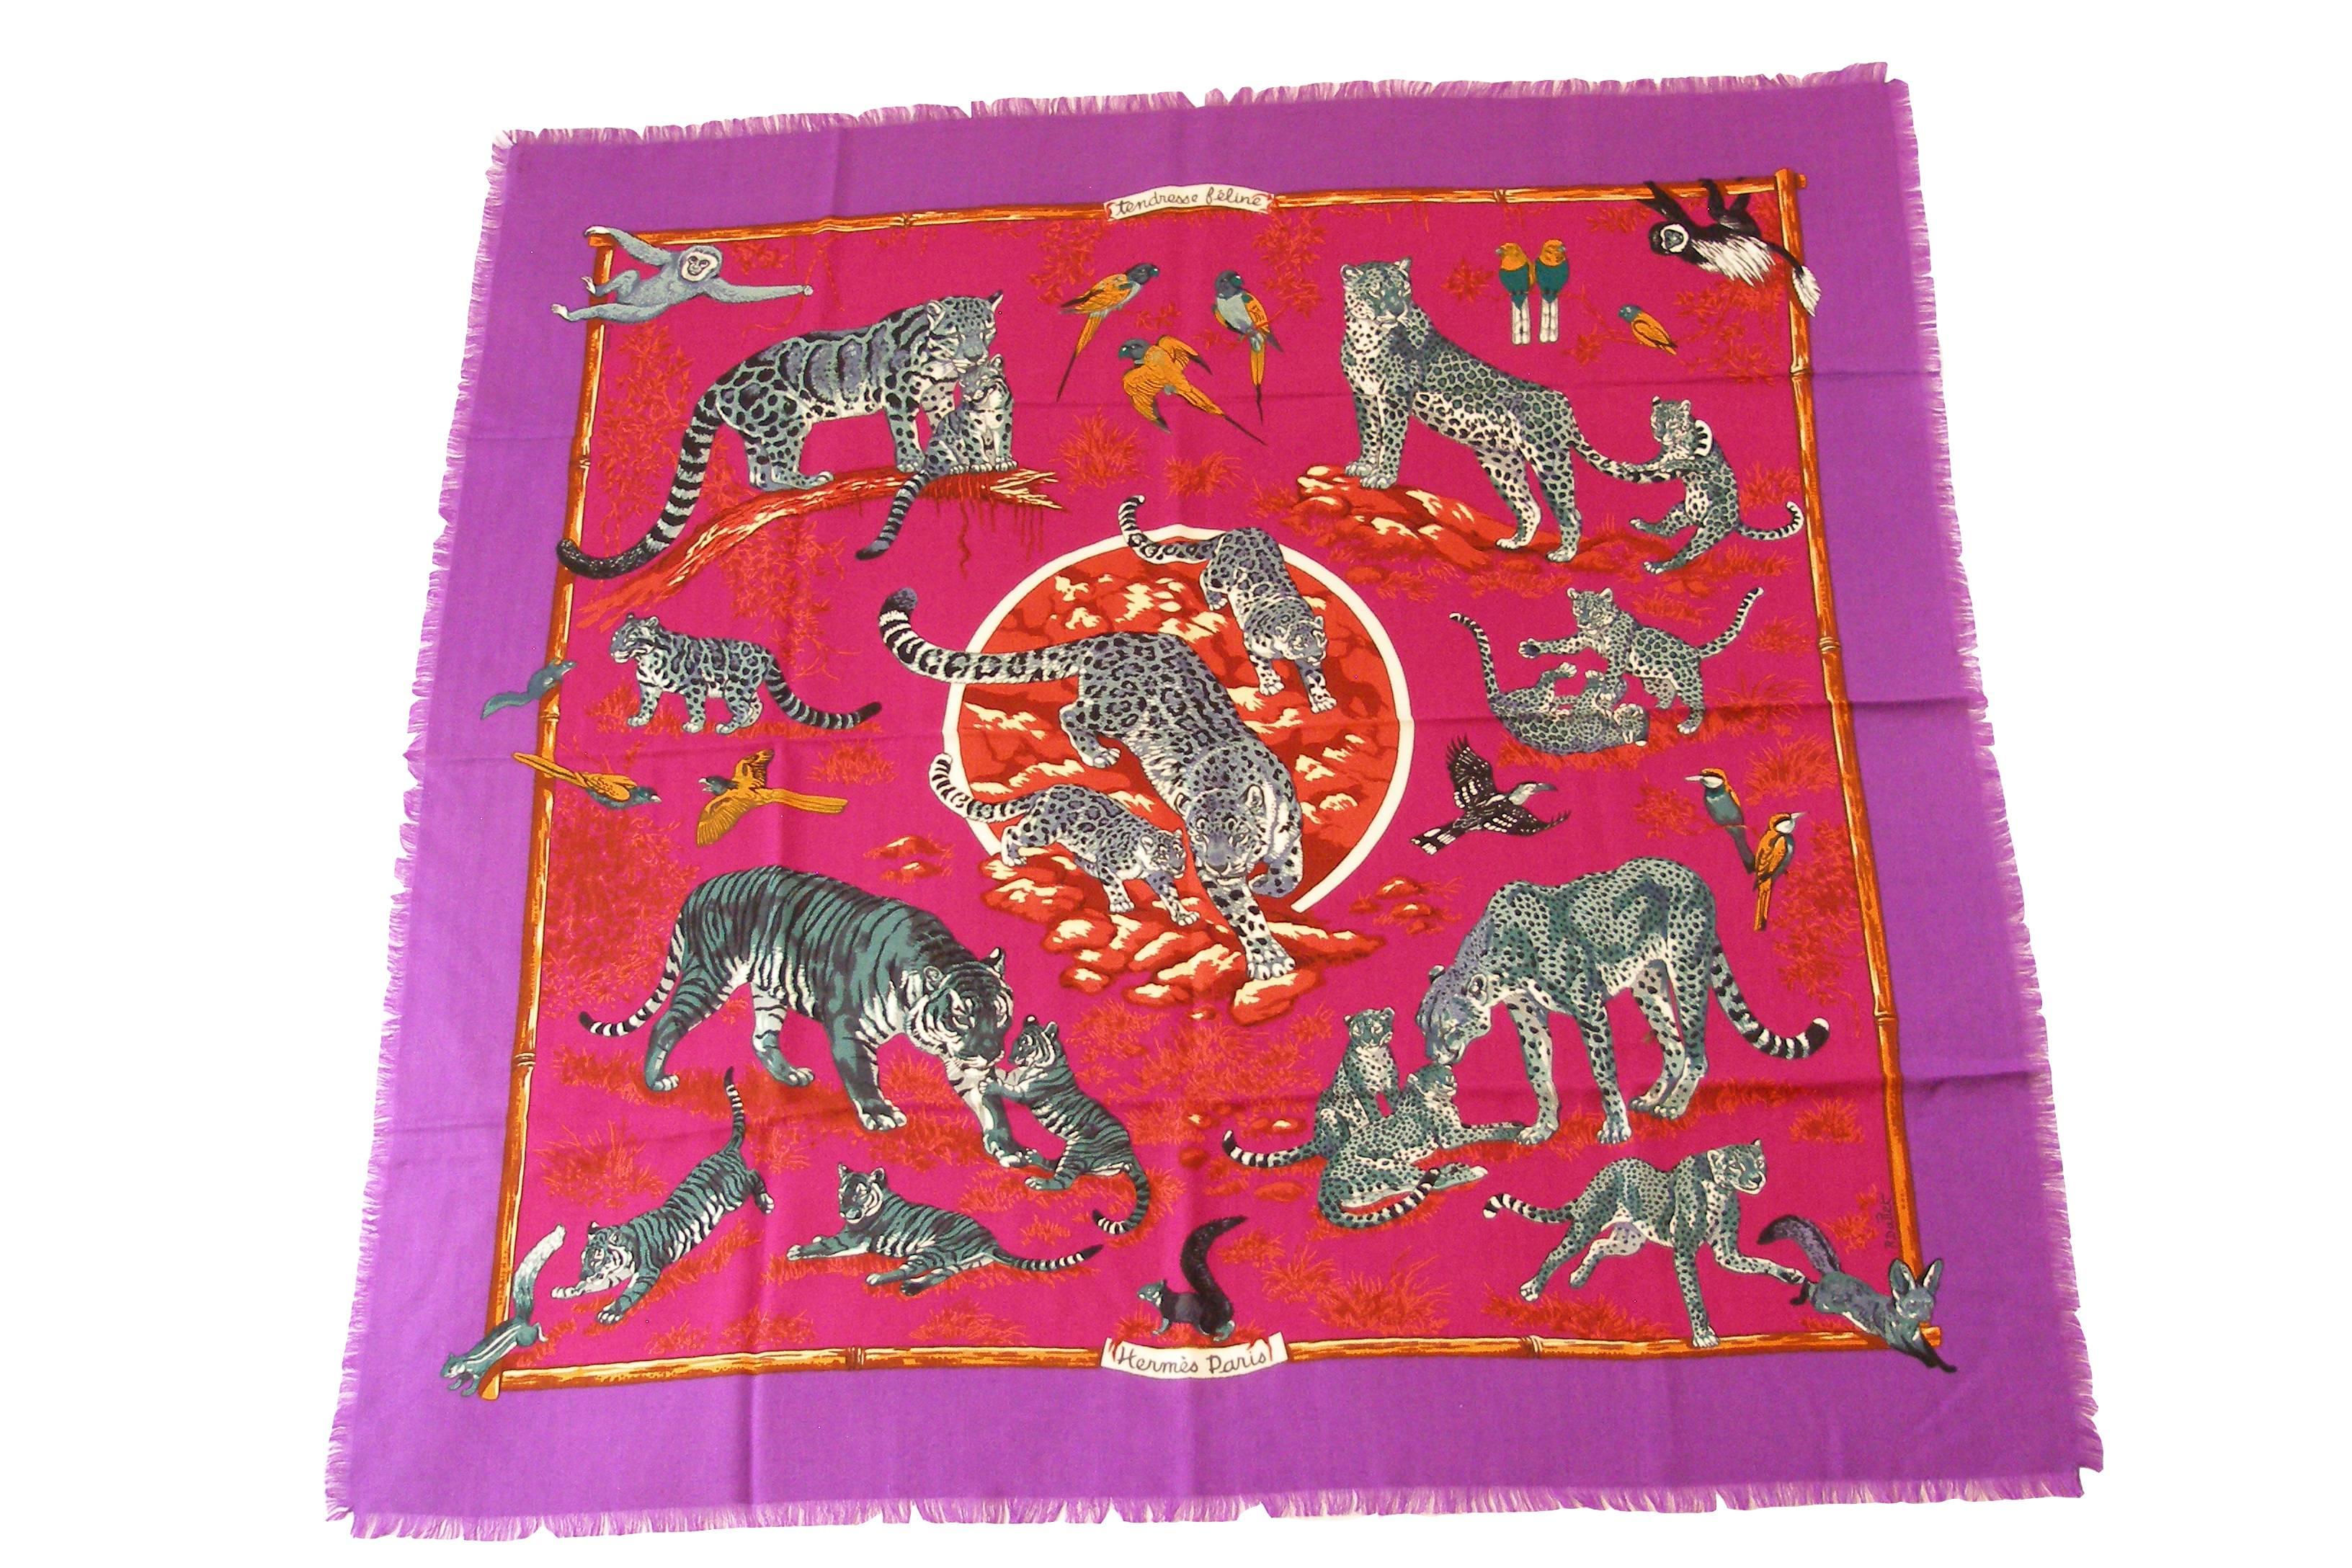 Marvelous luxurious scarf MADE IN FRANCE by HERMES designed by Robert Dallet 
Smooth, delicate lovely!
Signature : Hermès - Paris, © Hermes by R Dallet
Composition : 65% Cashmere, 35% Silk, fringe edges
Care tag : Yes 
Multicolor PURLE 
Dimension : 